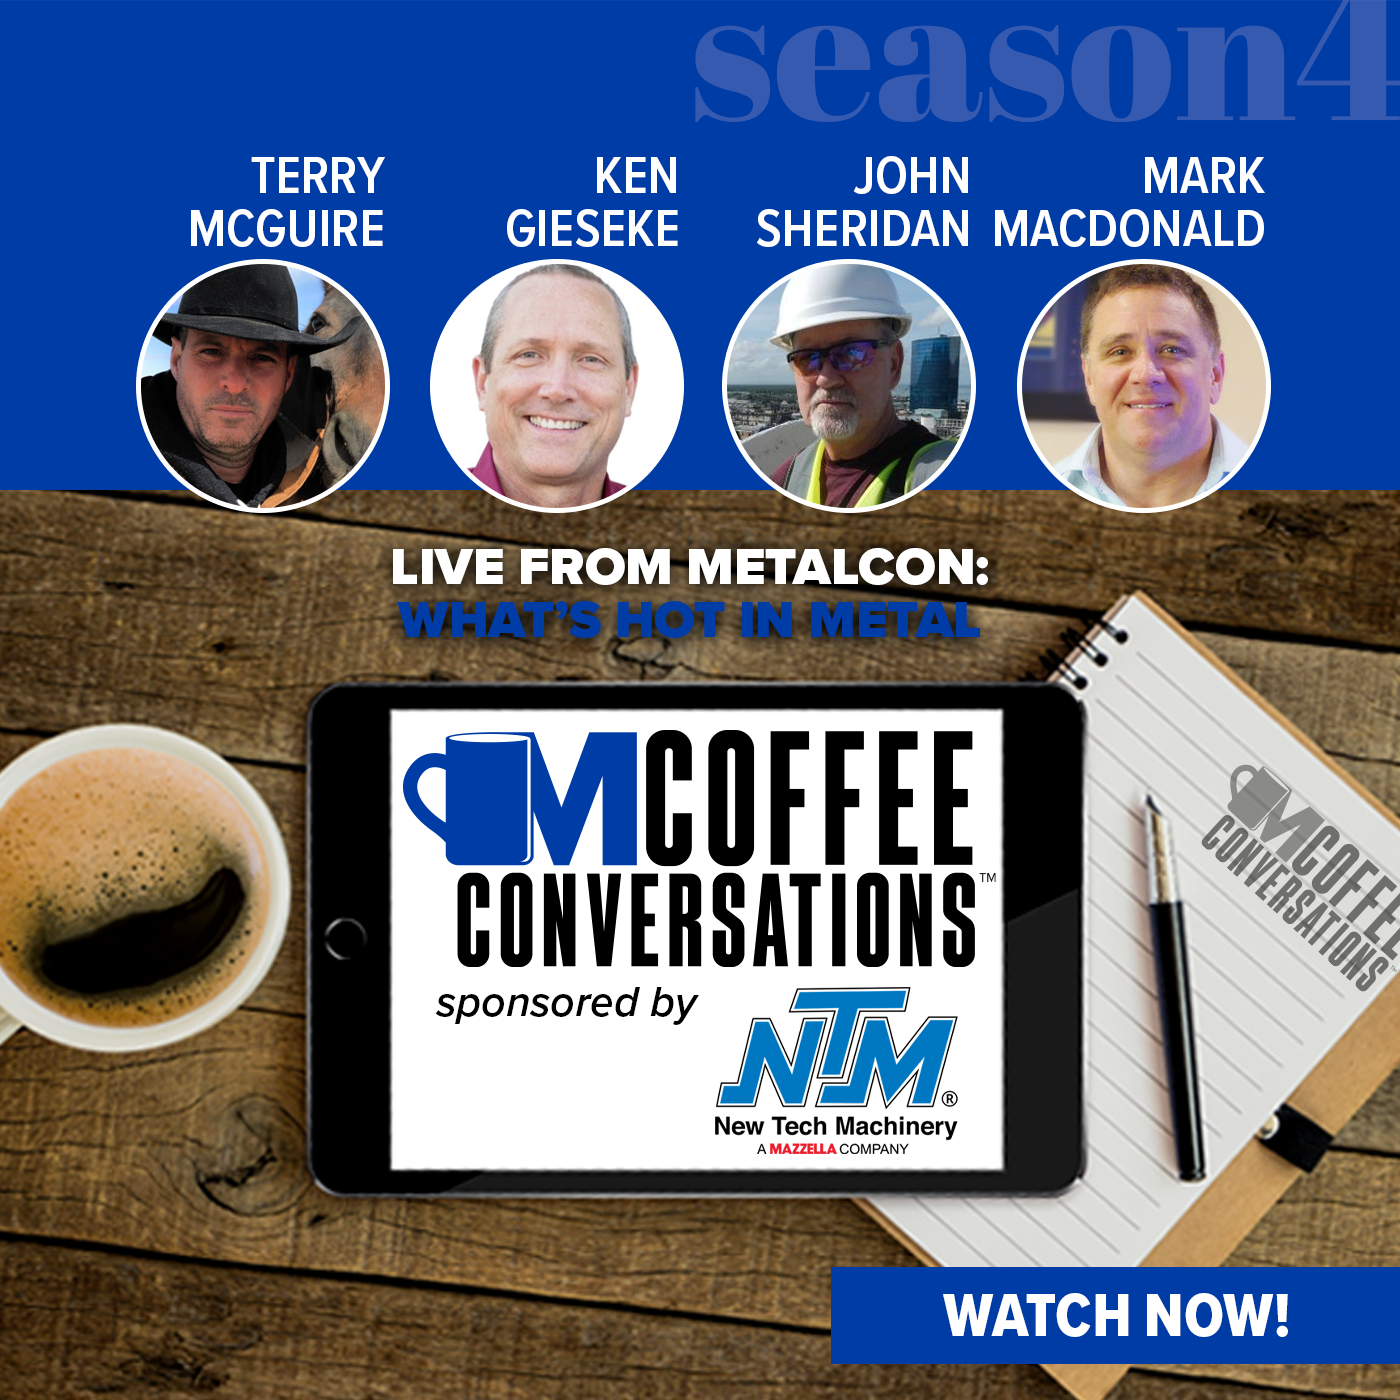 NTM - Coffee Conversations LIVE from METALCON - Sponsored by New Tech Machinery - POD